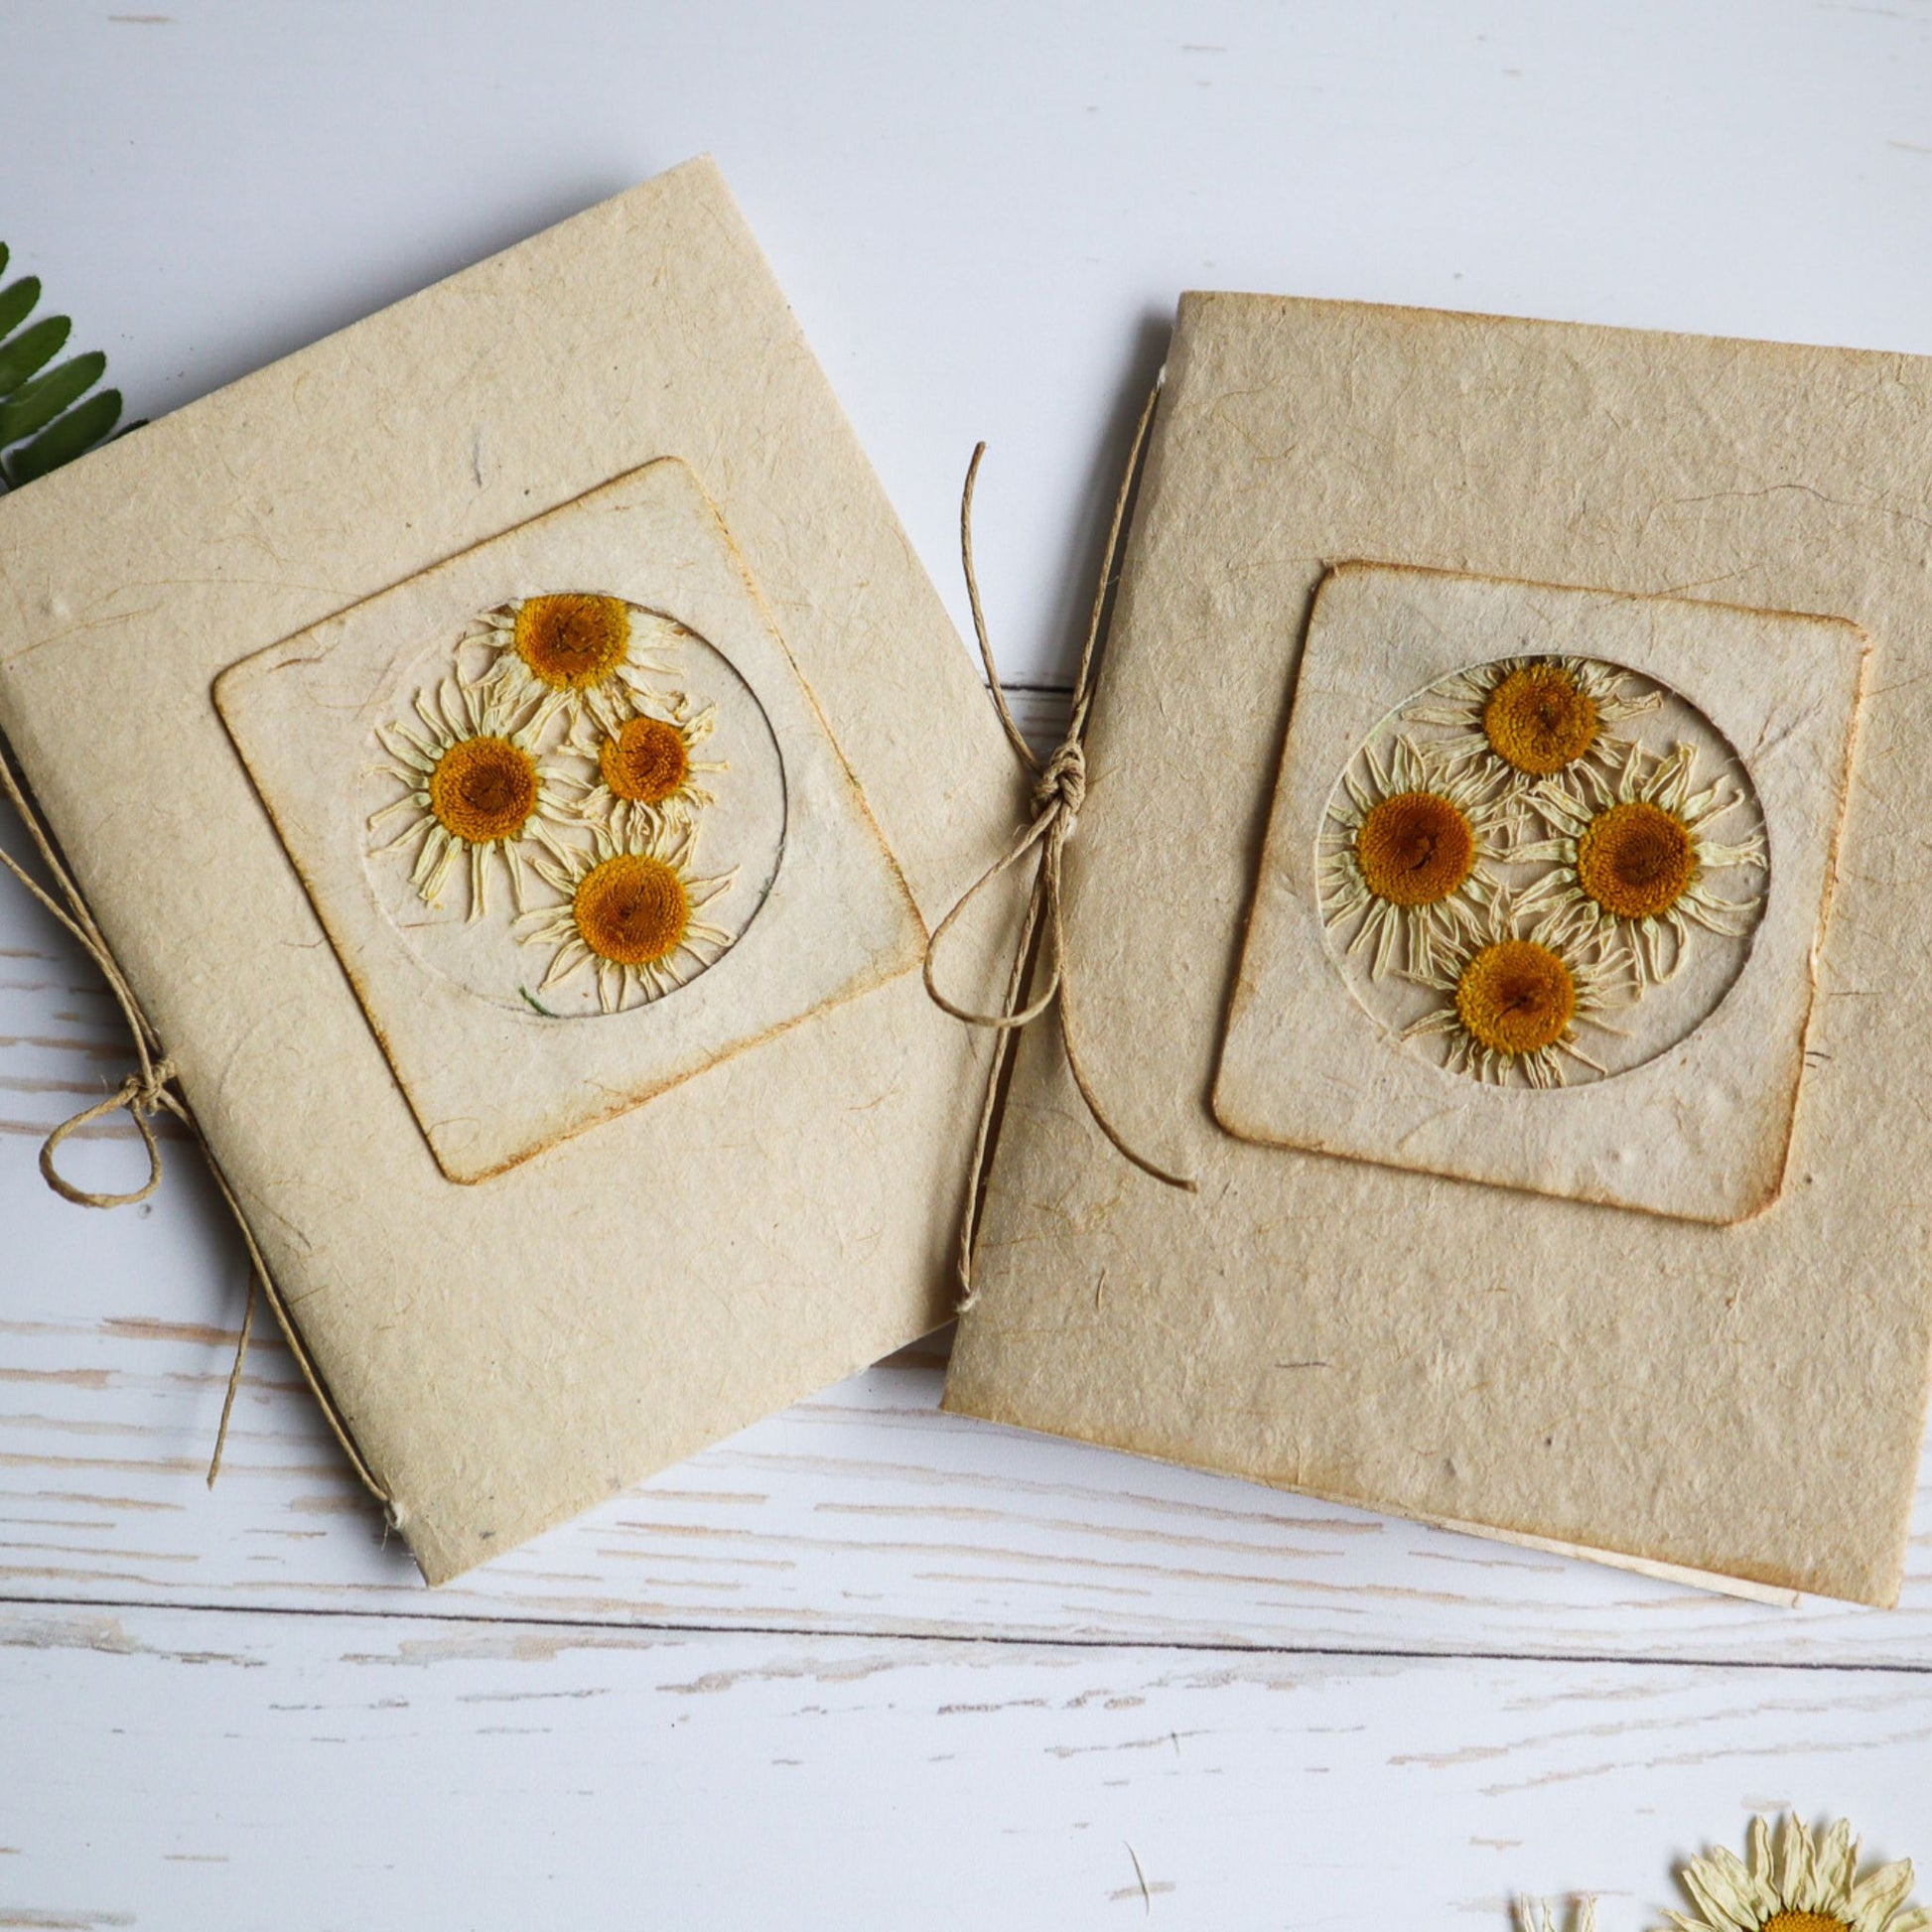 Helen Jeanne Handmade plantable seed paper journal with dried daisy type flowers on the cover and tied with biodegradable hemp cord.